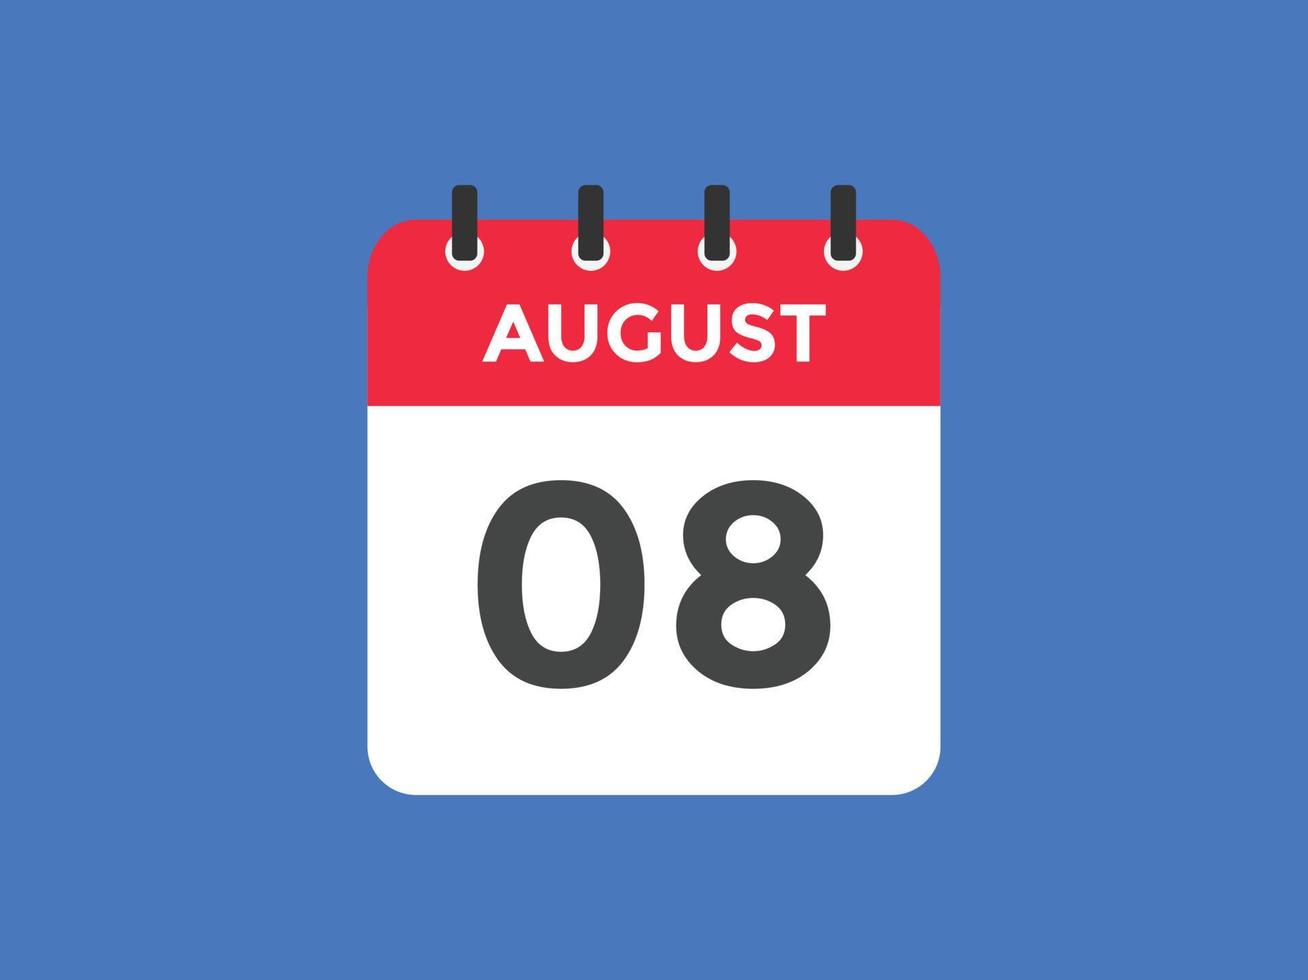 august 8 calendar reminder. 8th august daily calendar icon template. Calendar 8th august icon Design template. Vector illustration